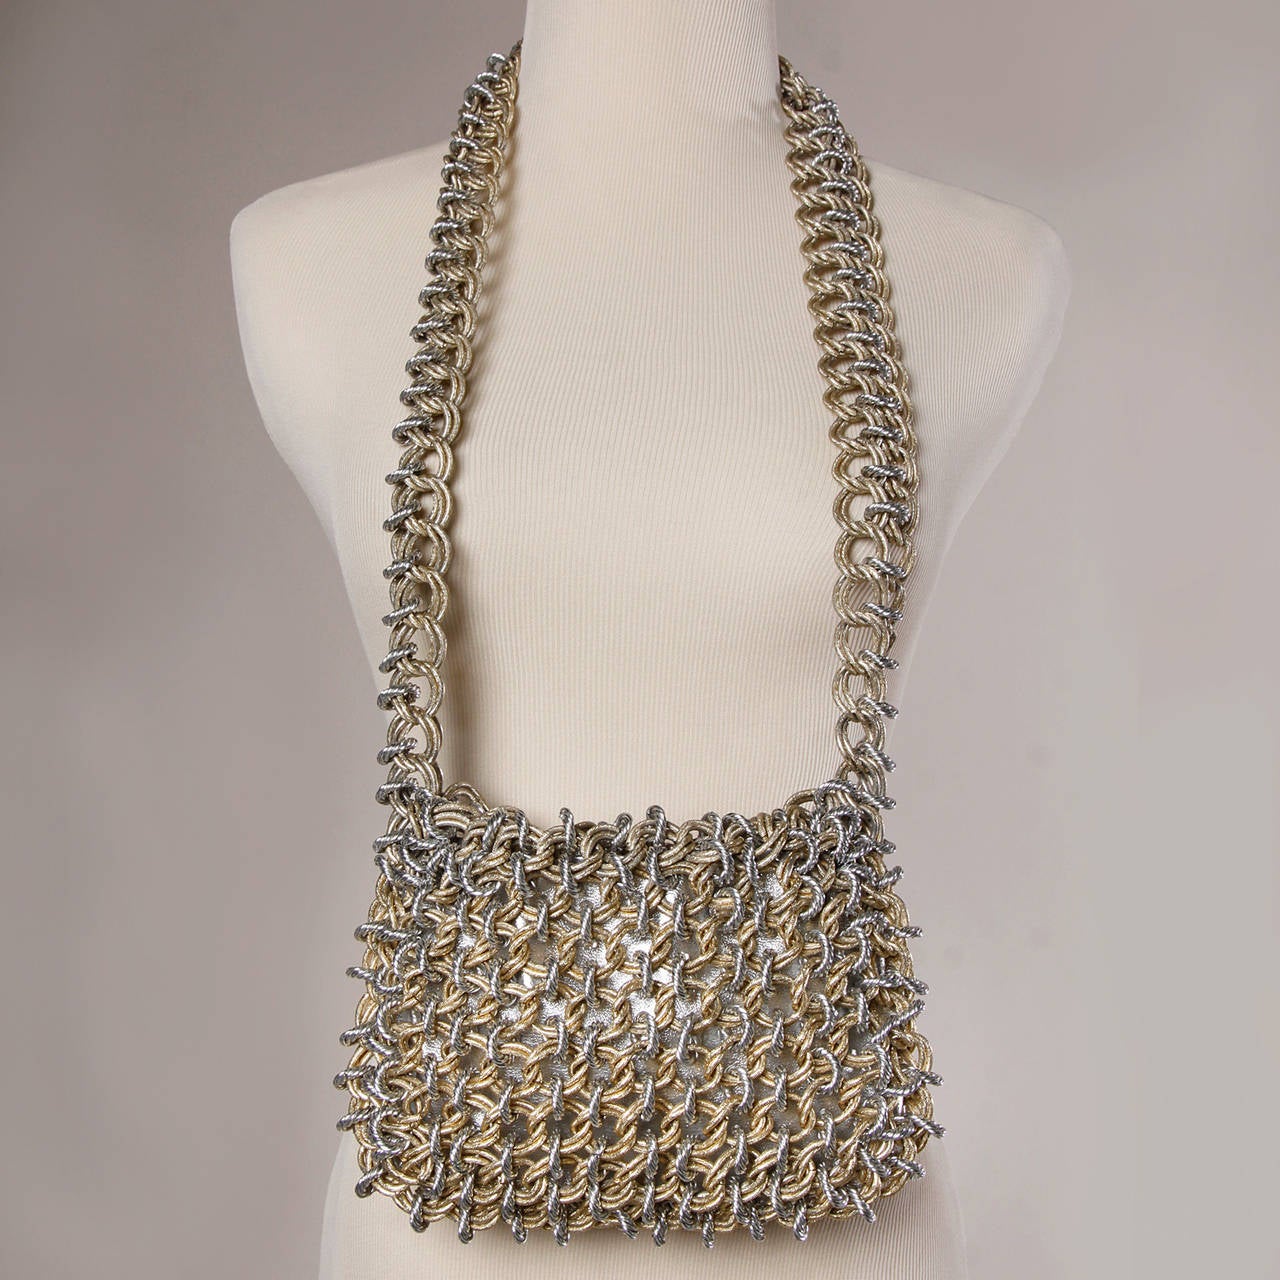 Phenomenal heavy chain maille vintage shoulder bag with long shoulder strap and metallic vinyl lining. Huge gold and silver tone metal links. An amazing piece!

Details:

Fully Lined
Top Latch Closure
One Size
Color: Silver Metallic/ Gold